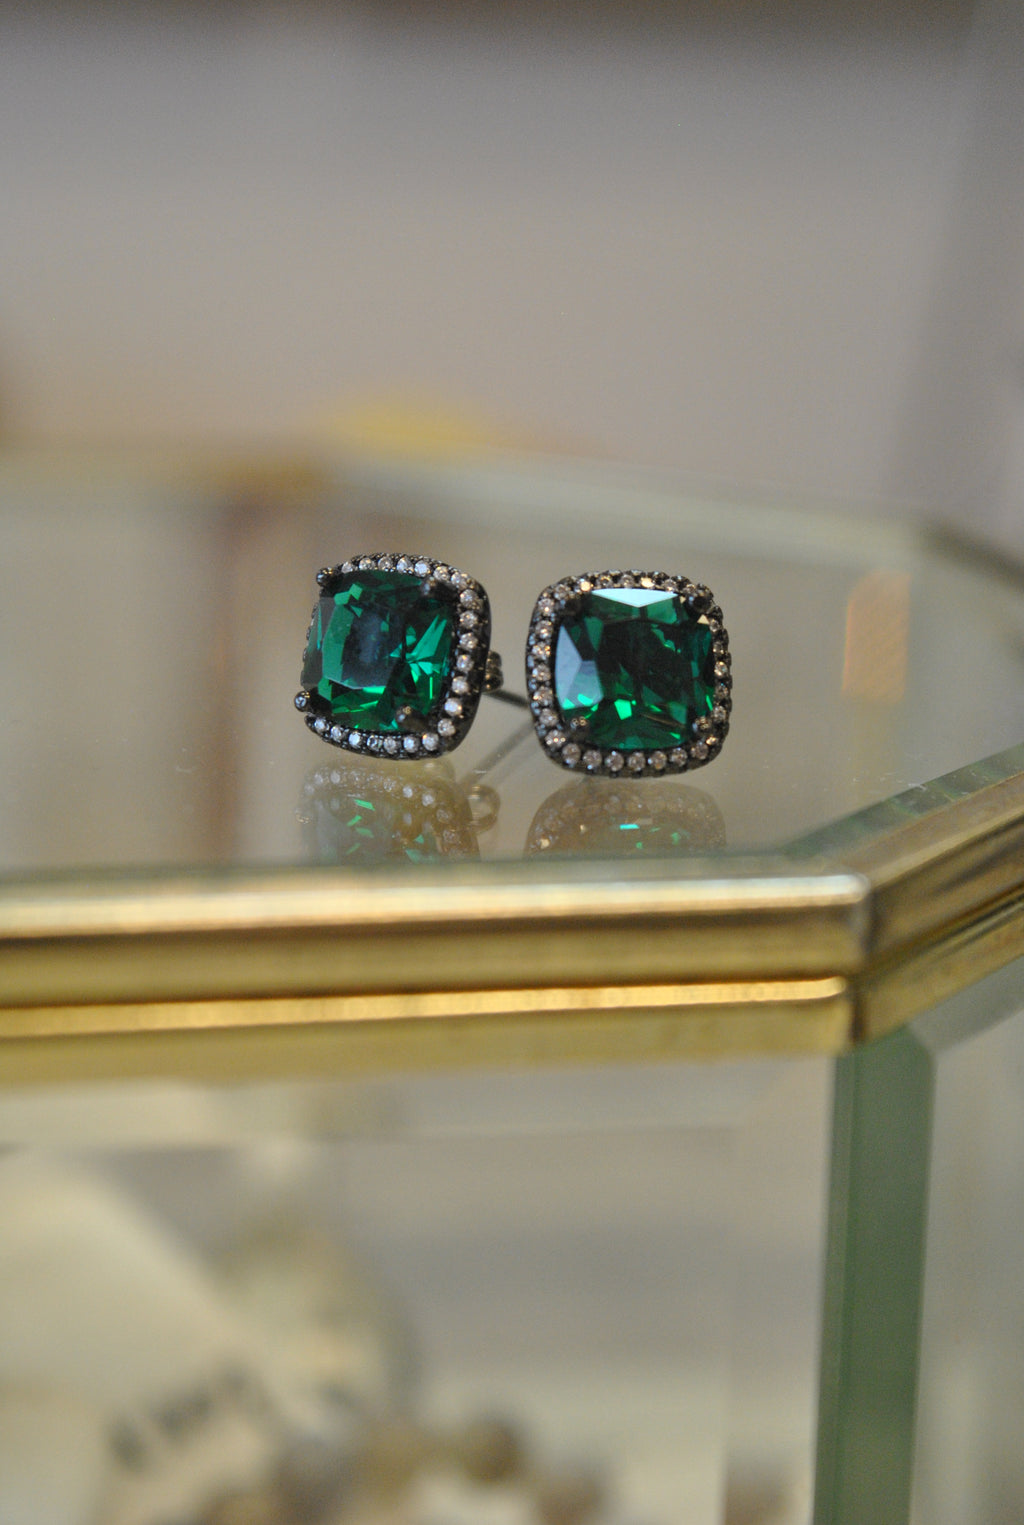 STUDS COLLECTION - EMERALD GREEN CRYSTALS AND RHINESTONES STUDS